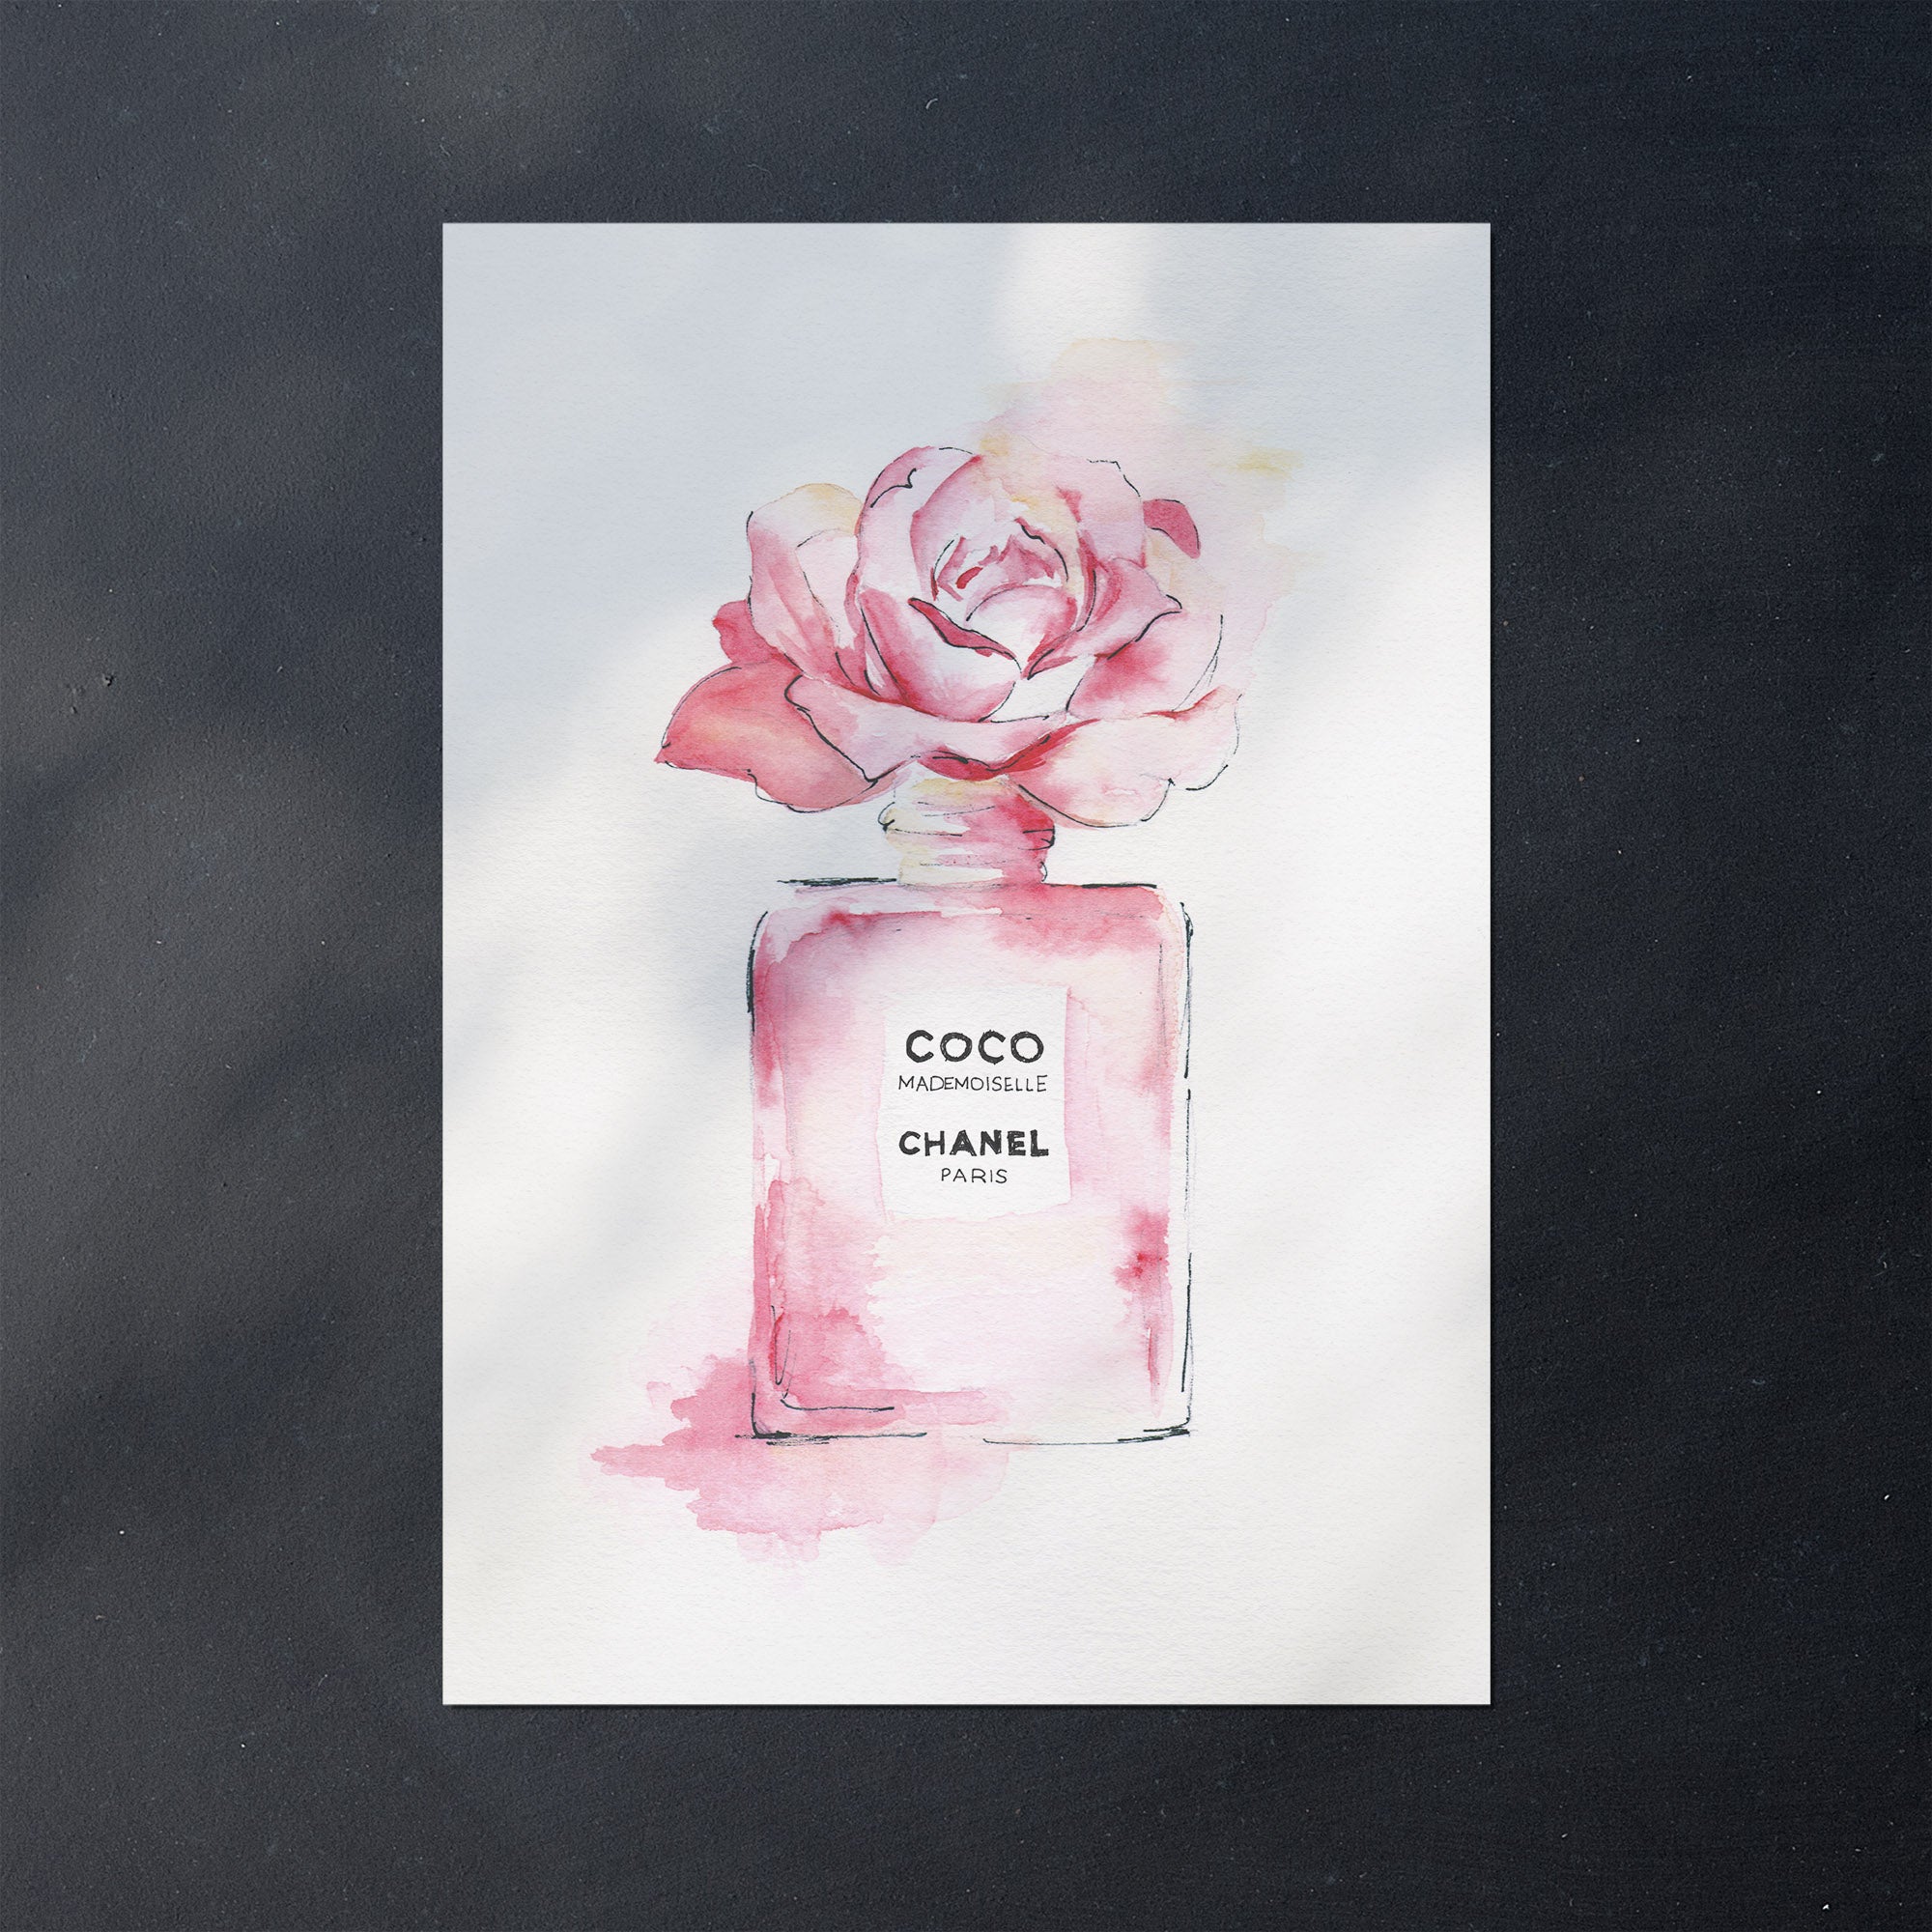 An unframed poster with a Chanel perfume bottle and pink rose